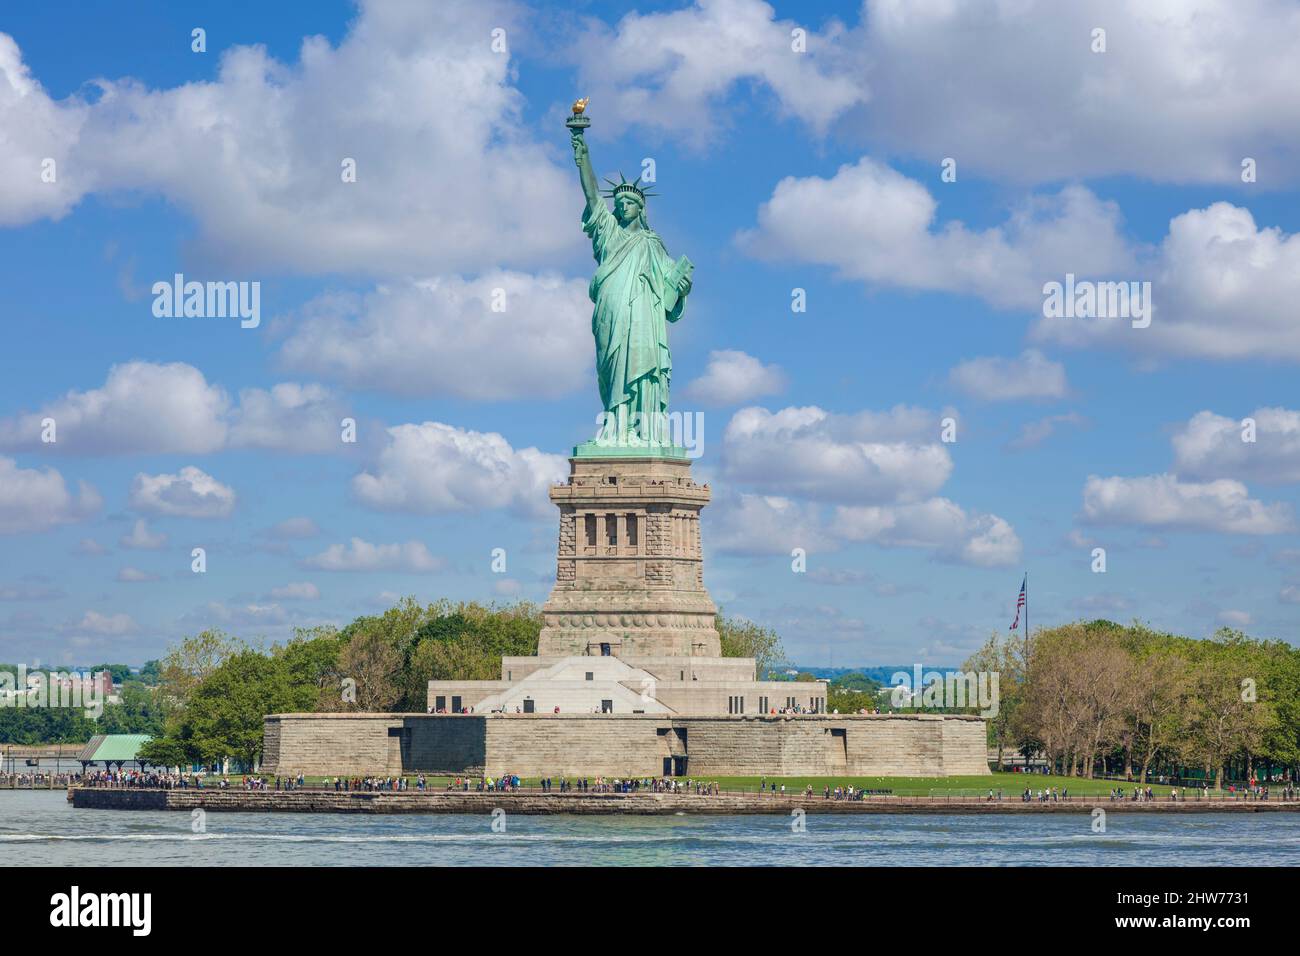 Statue of Liberty New York Statue of Liberty New York city Statue of Liberty island new york state usa united states of america blue sky white clouds Stock Photo